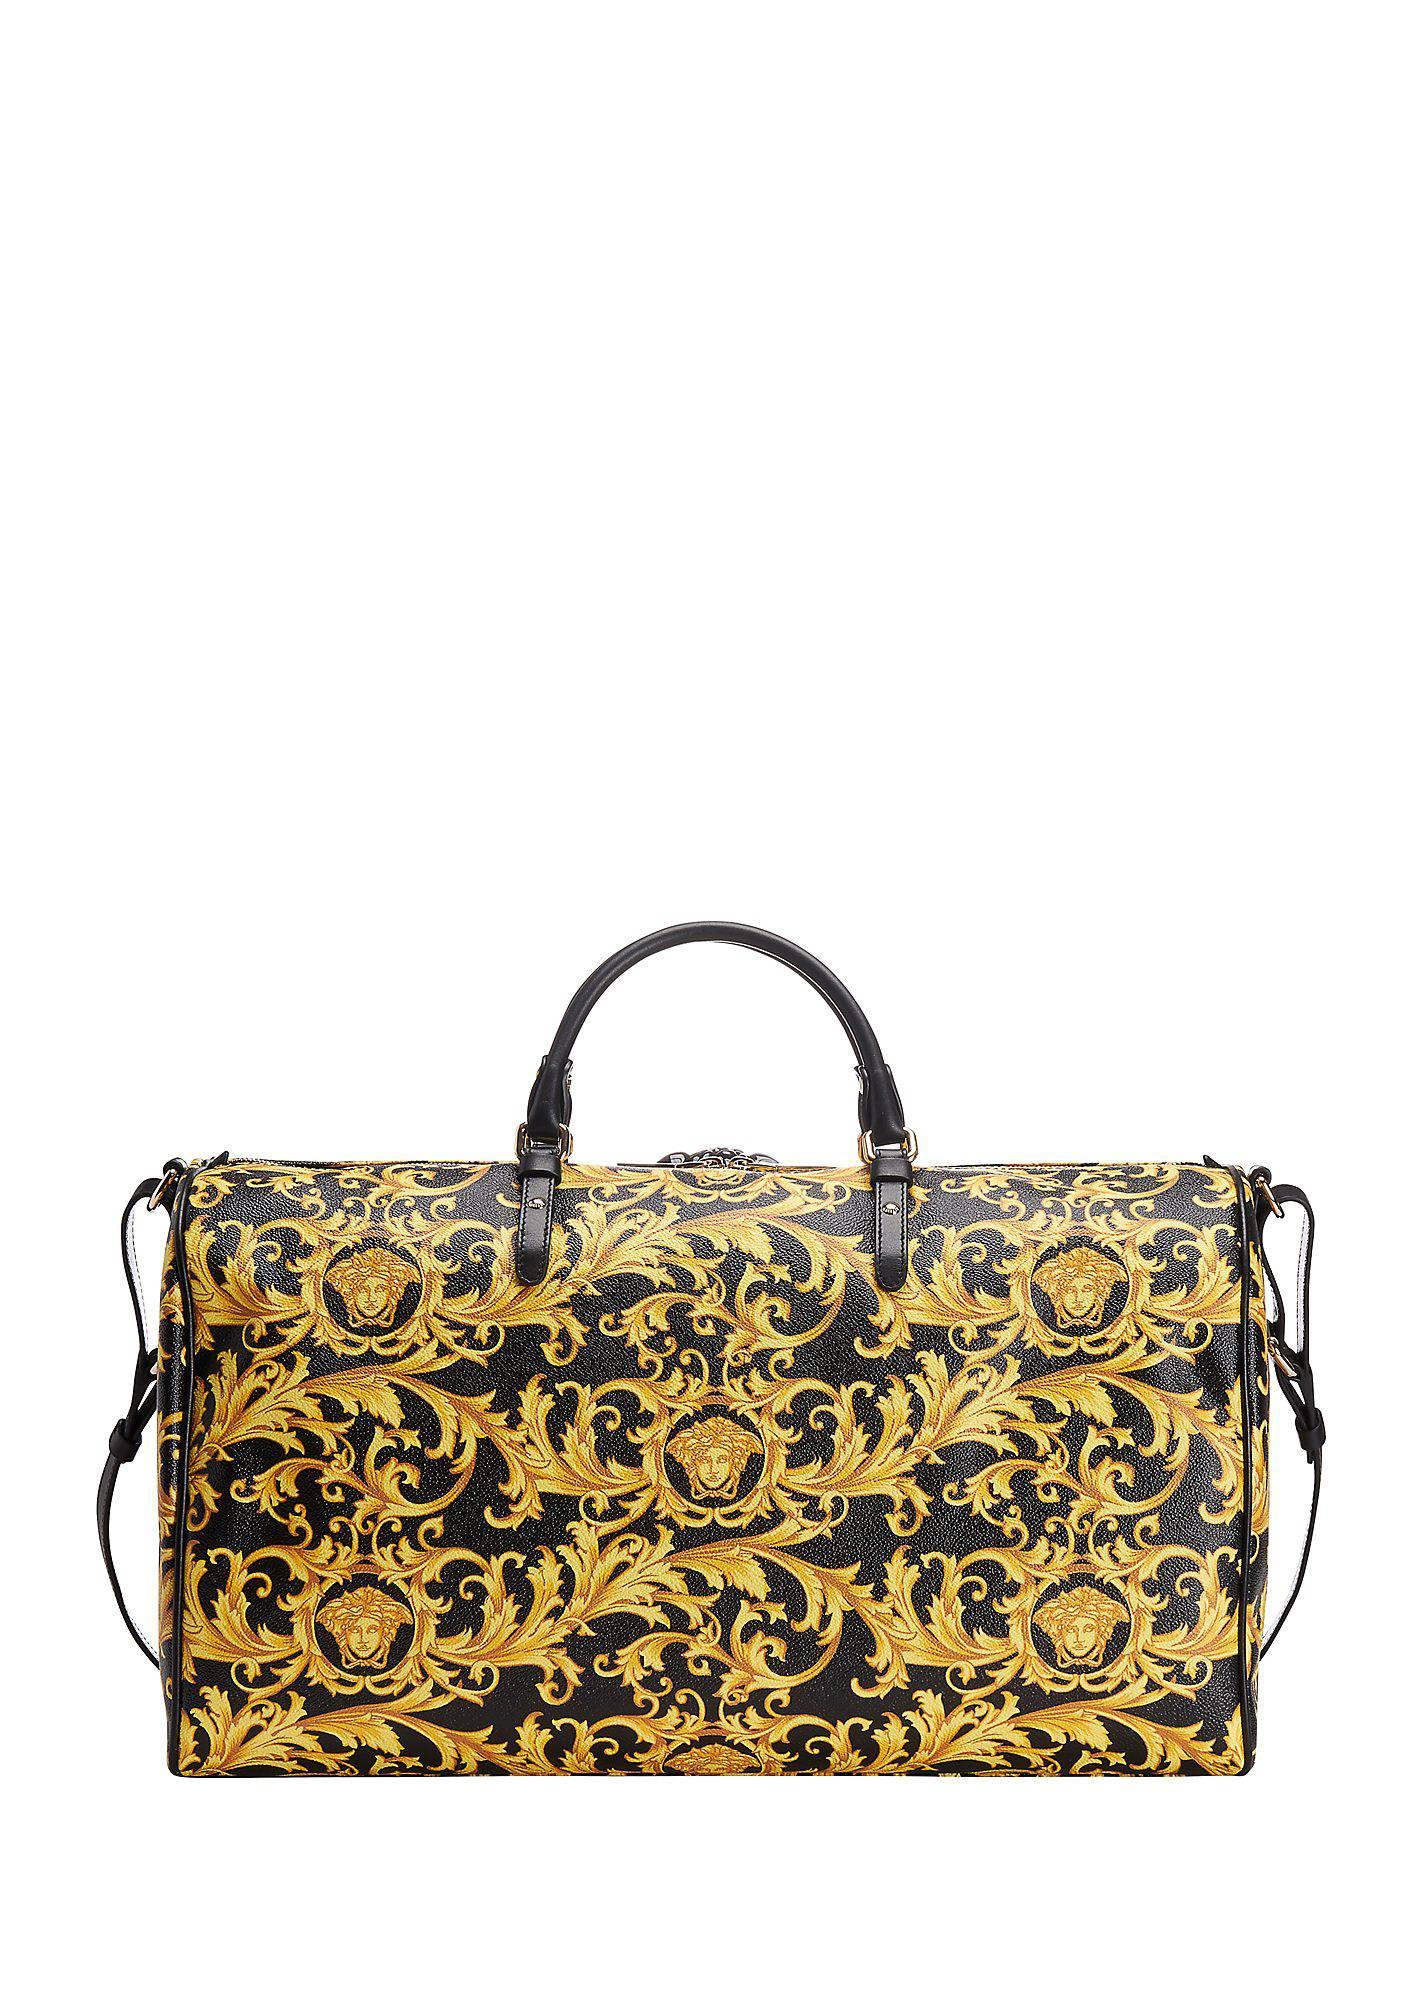 VERSACE

 Weekender in stunning Barocco Medusa print for travel in glamorous style. 

Top carry handle and shoulder strap. (please check out matching large suitcase in our store)

Textured Barocco printed PVC, 

two top handles, detachable